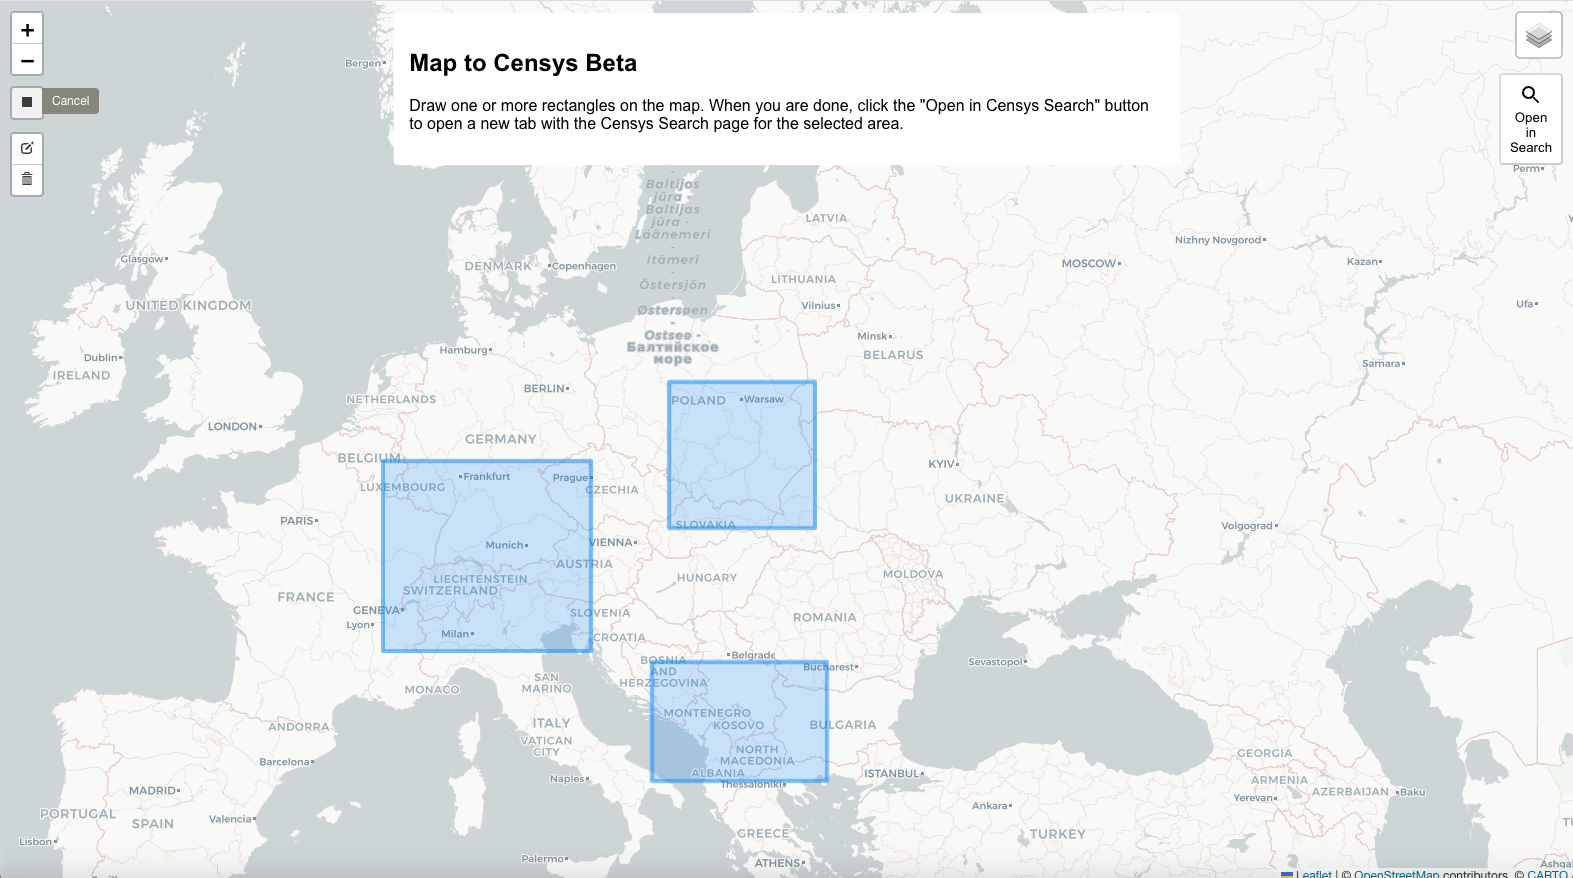 Map to Censys Beta - Multiple Regions